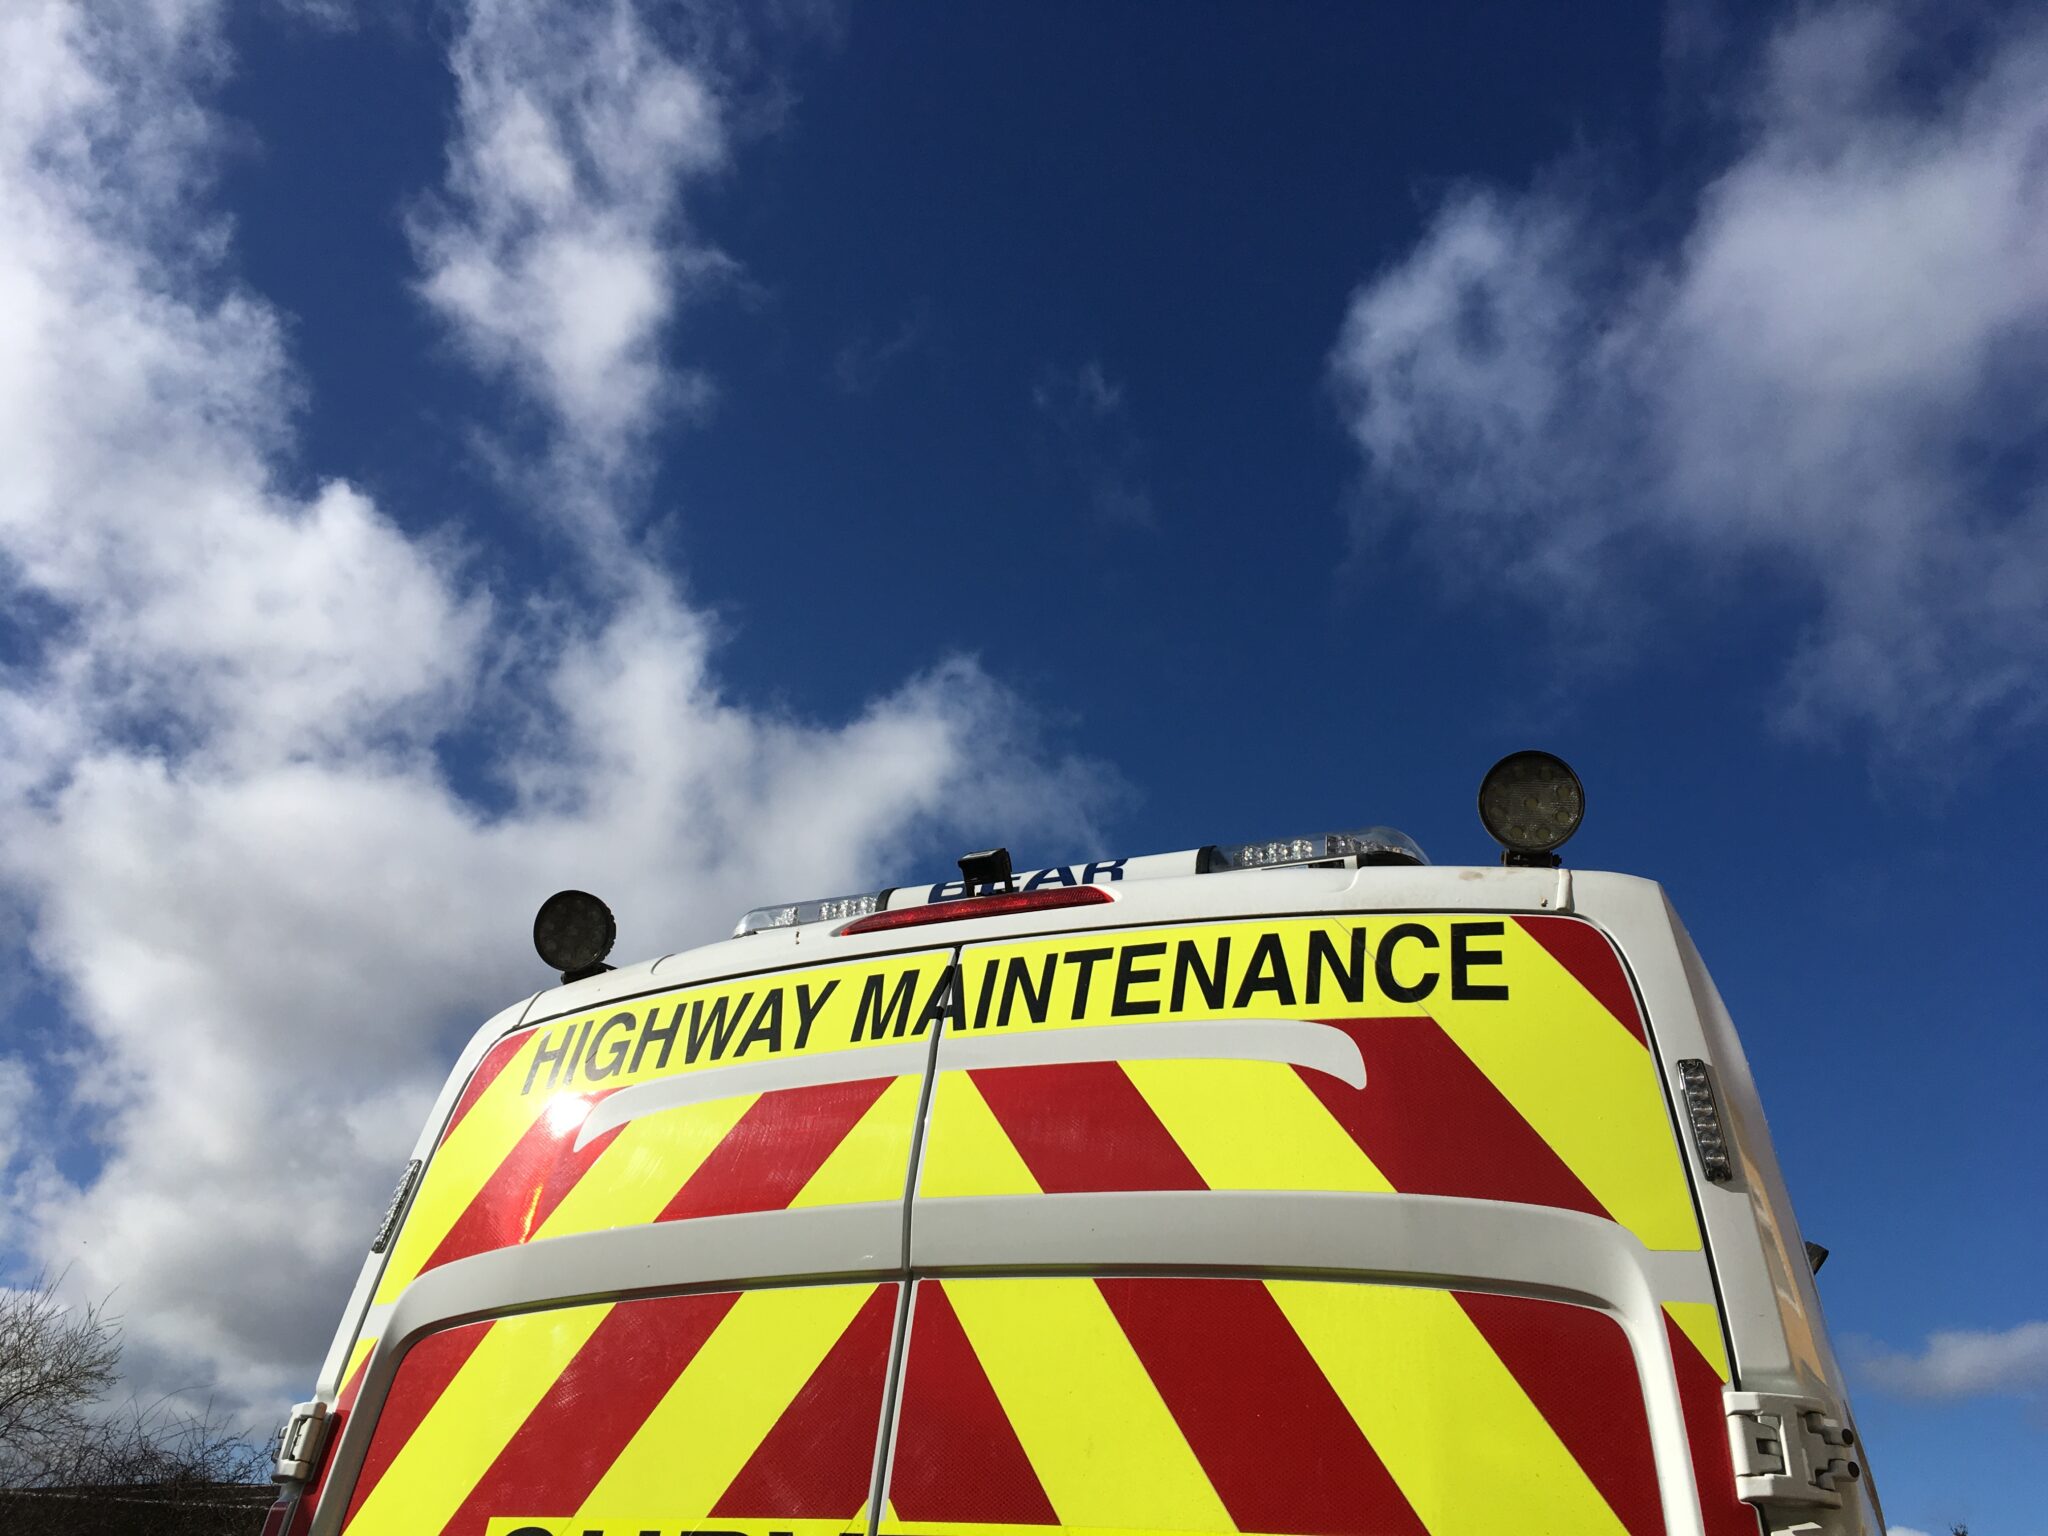 M80 OVERNIGHT CARRIAGEWAY CLOSURES FOR ESSENTIAL MAINTENANCE WORKS